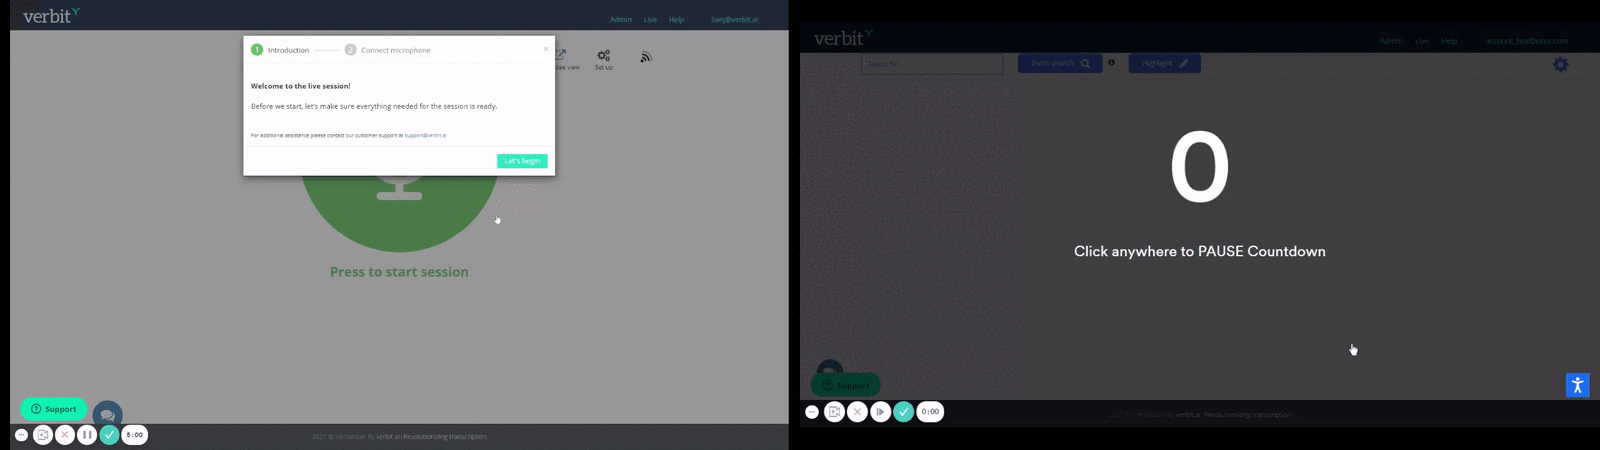 gif - Verbitext Solution Demo (shows both Speaker and Attendee Pages).gif